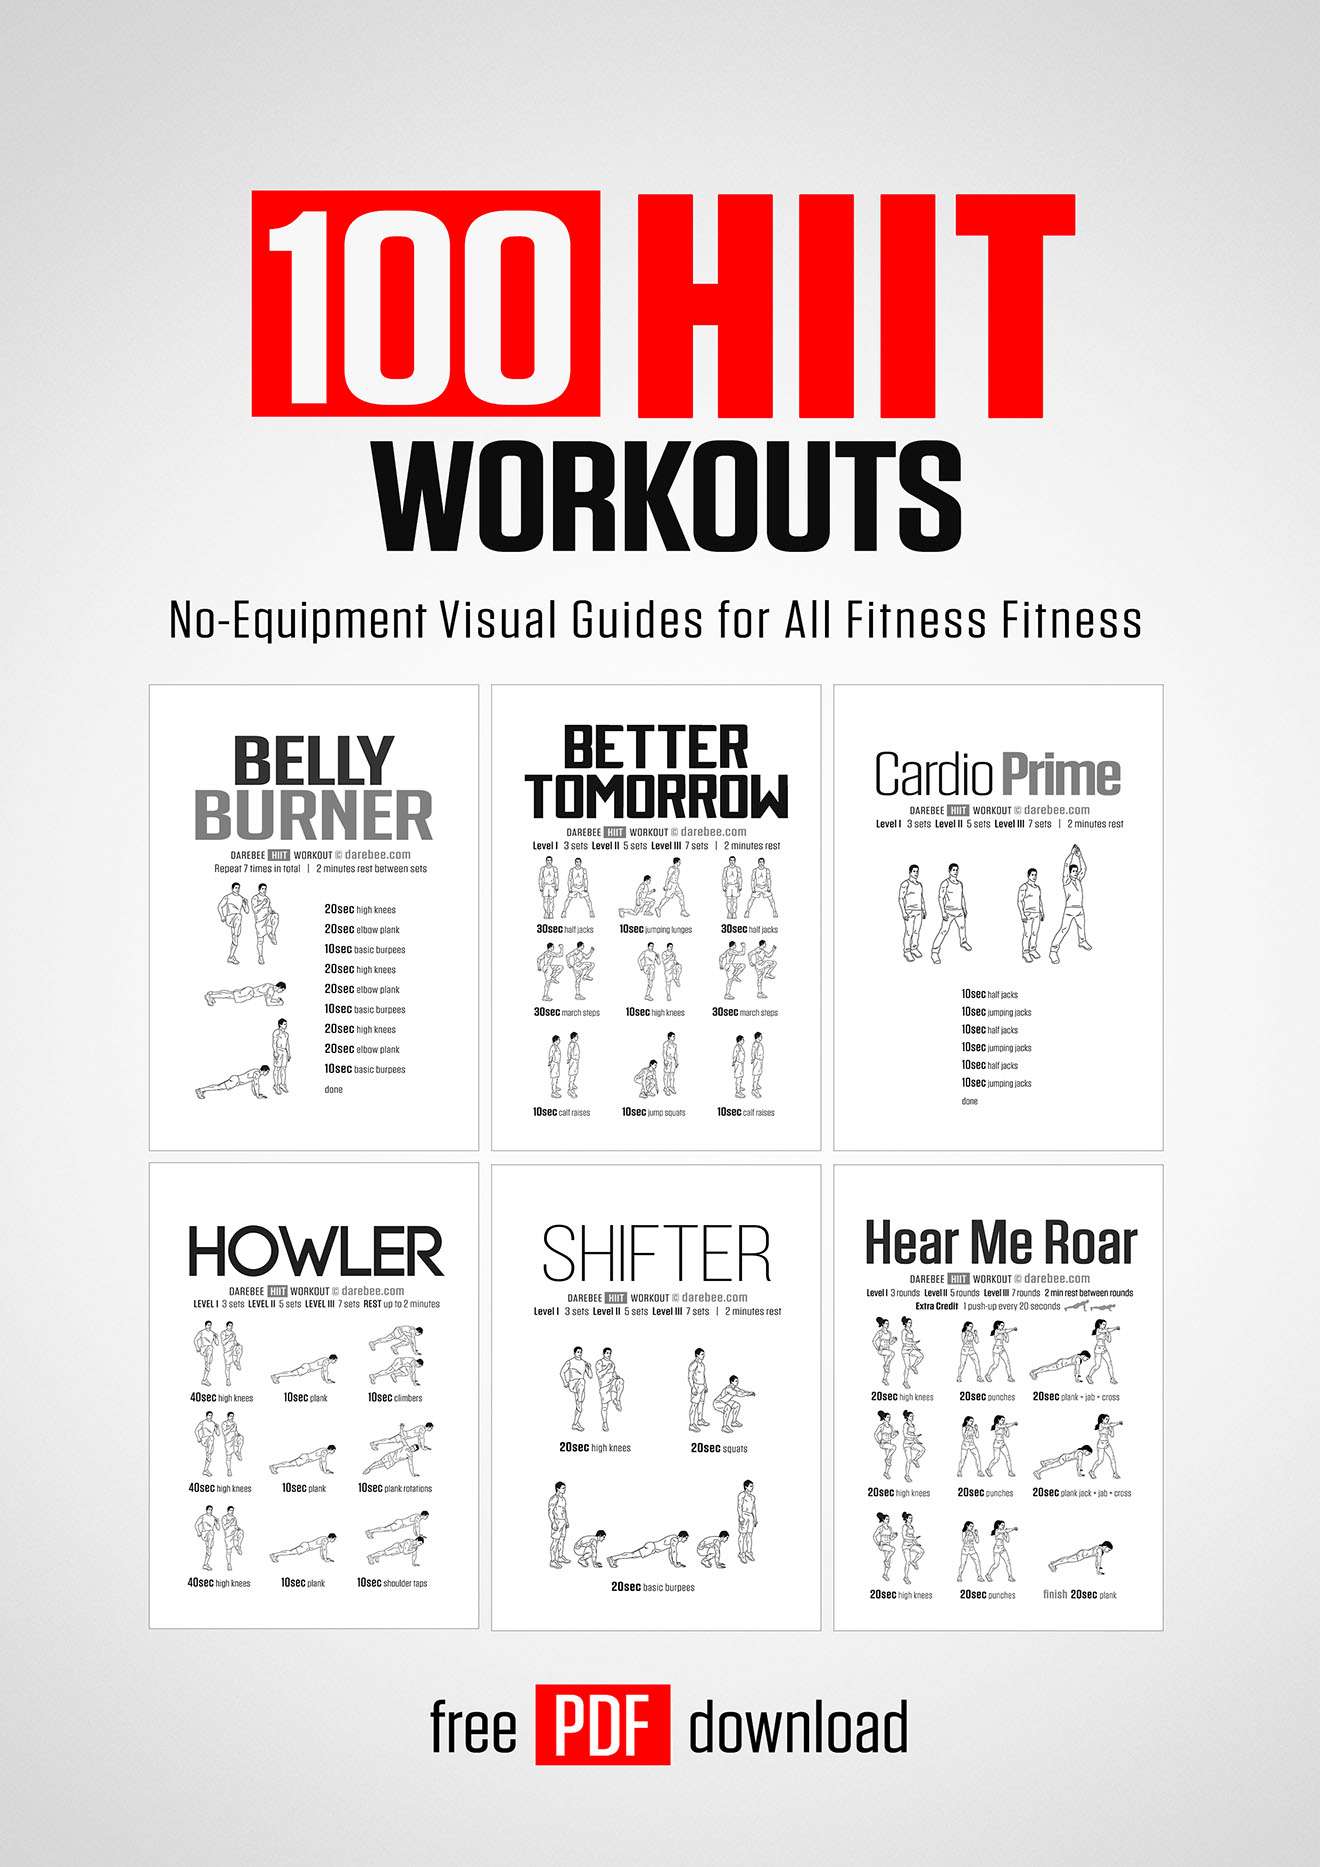 Interval training workouts